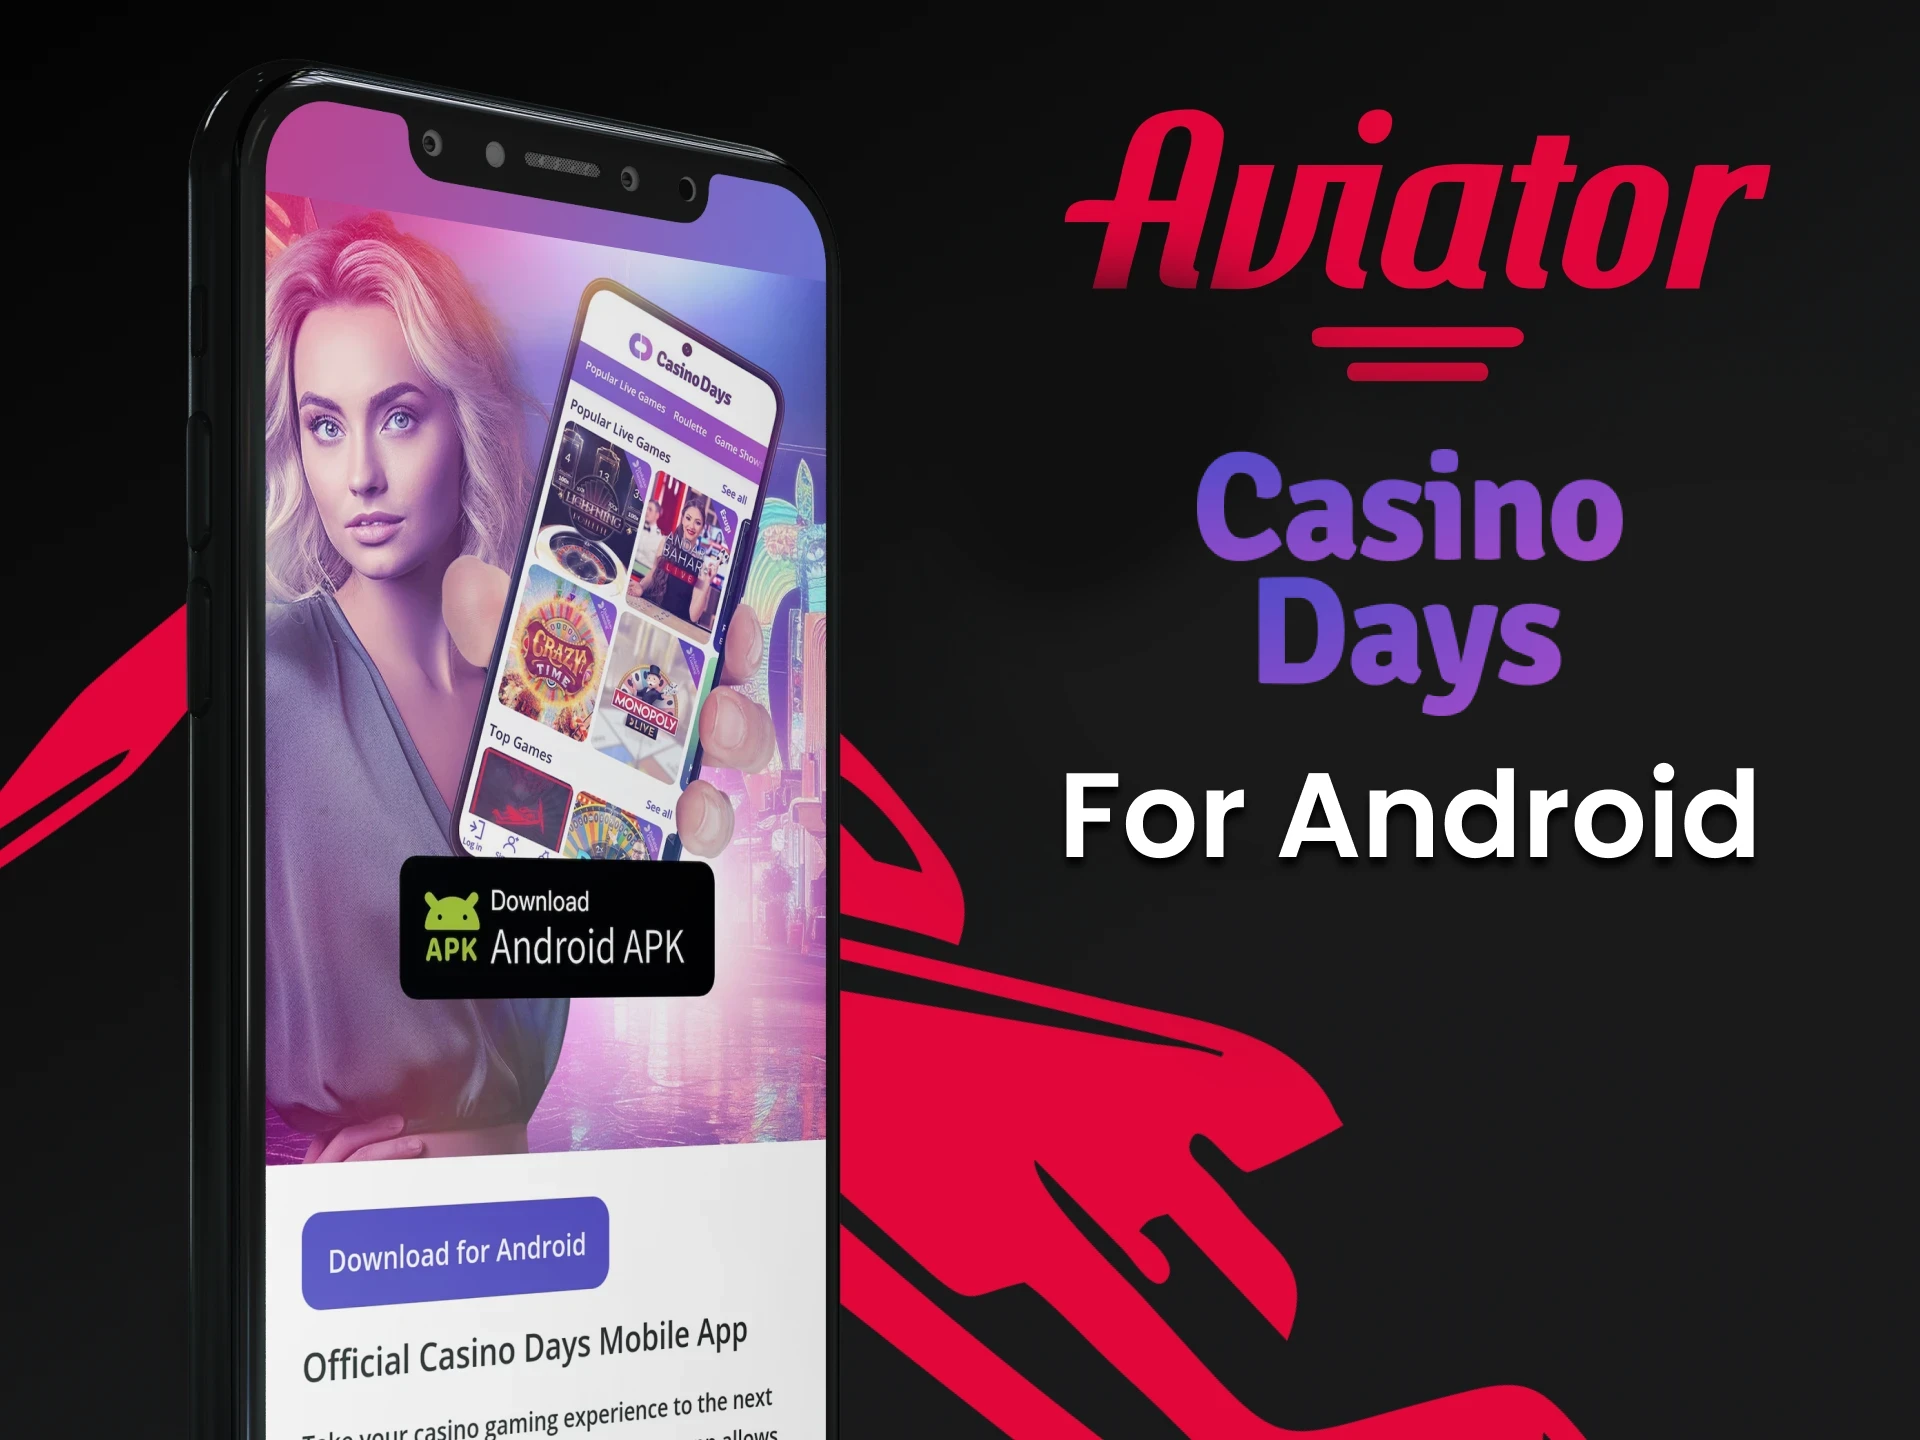 Download the Casino Days app to play Aviator on Android.